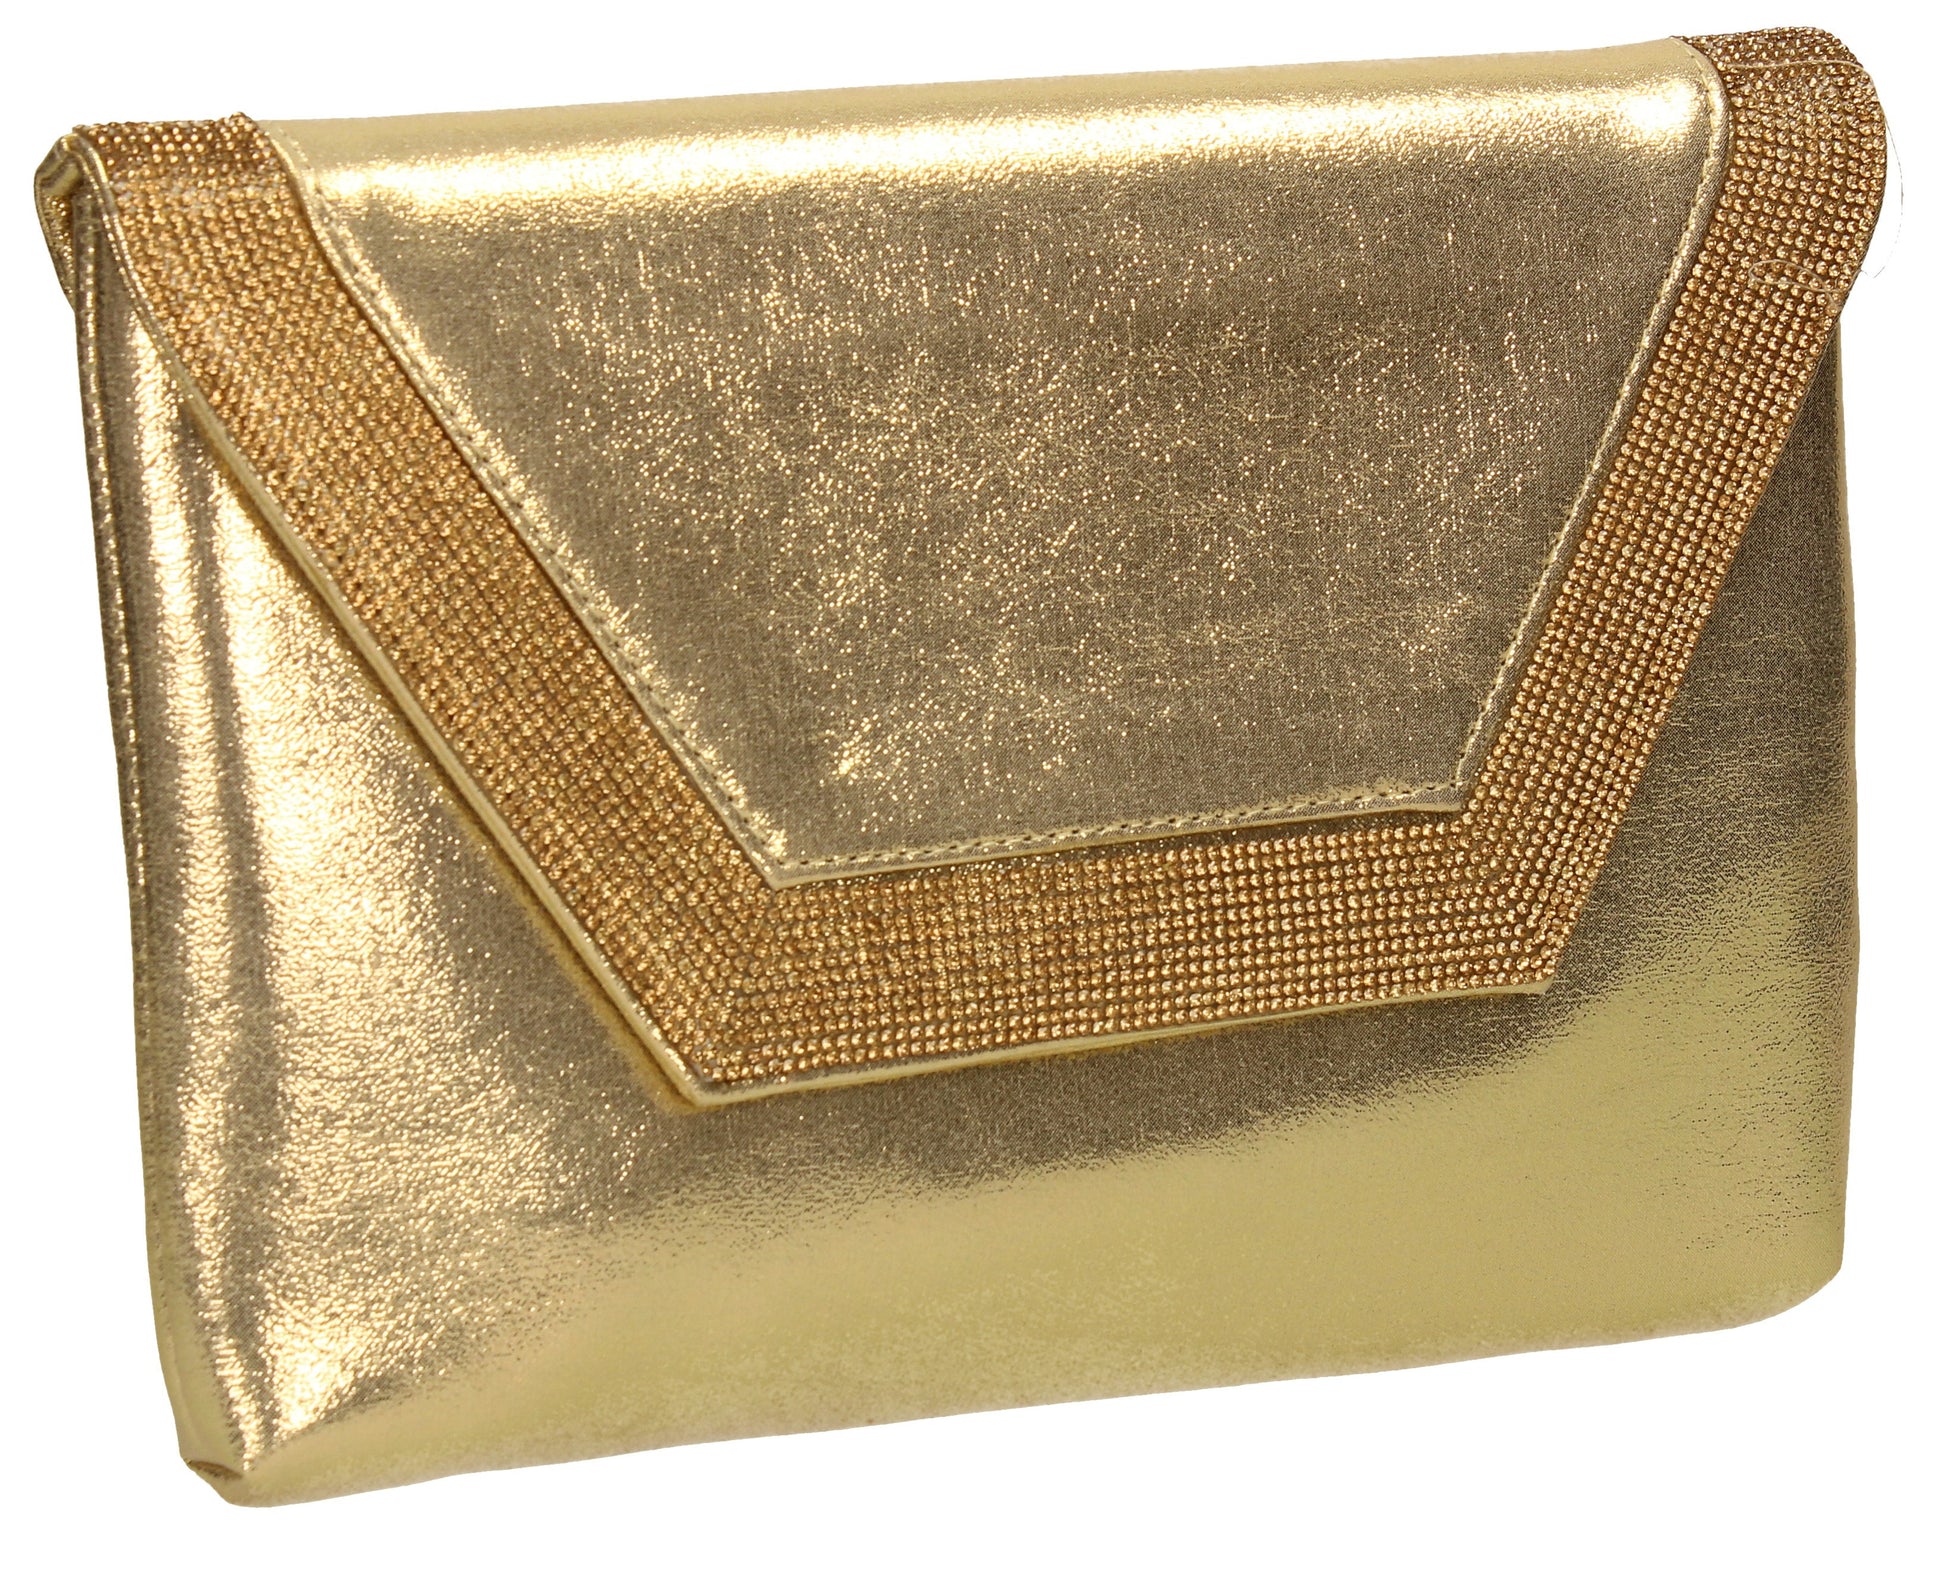 SWANKYSWANS Lilly Clutch Bag Gold Cute Cheap Clutch Bag For Weddings School and Work